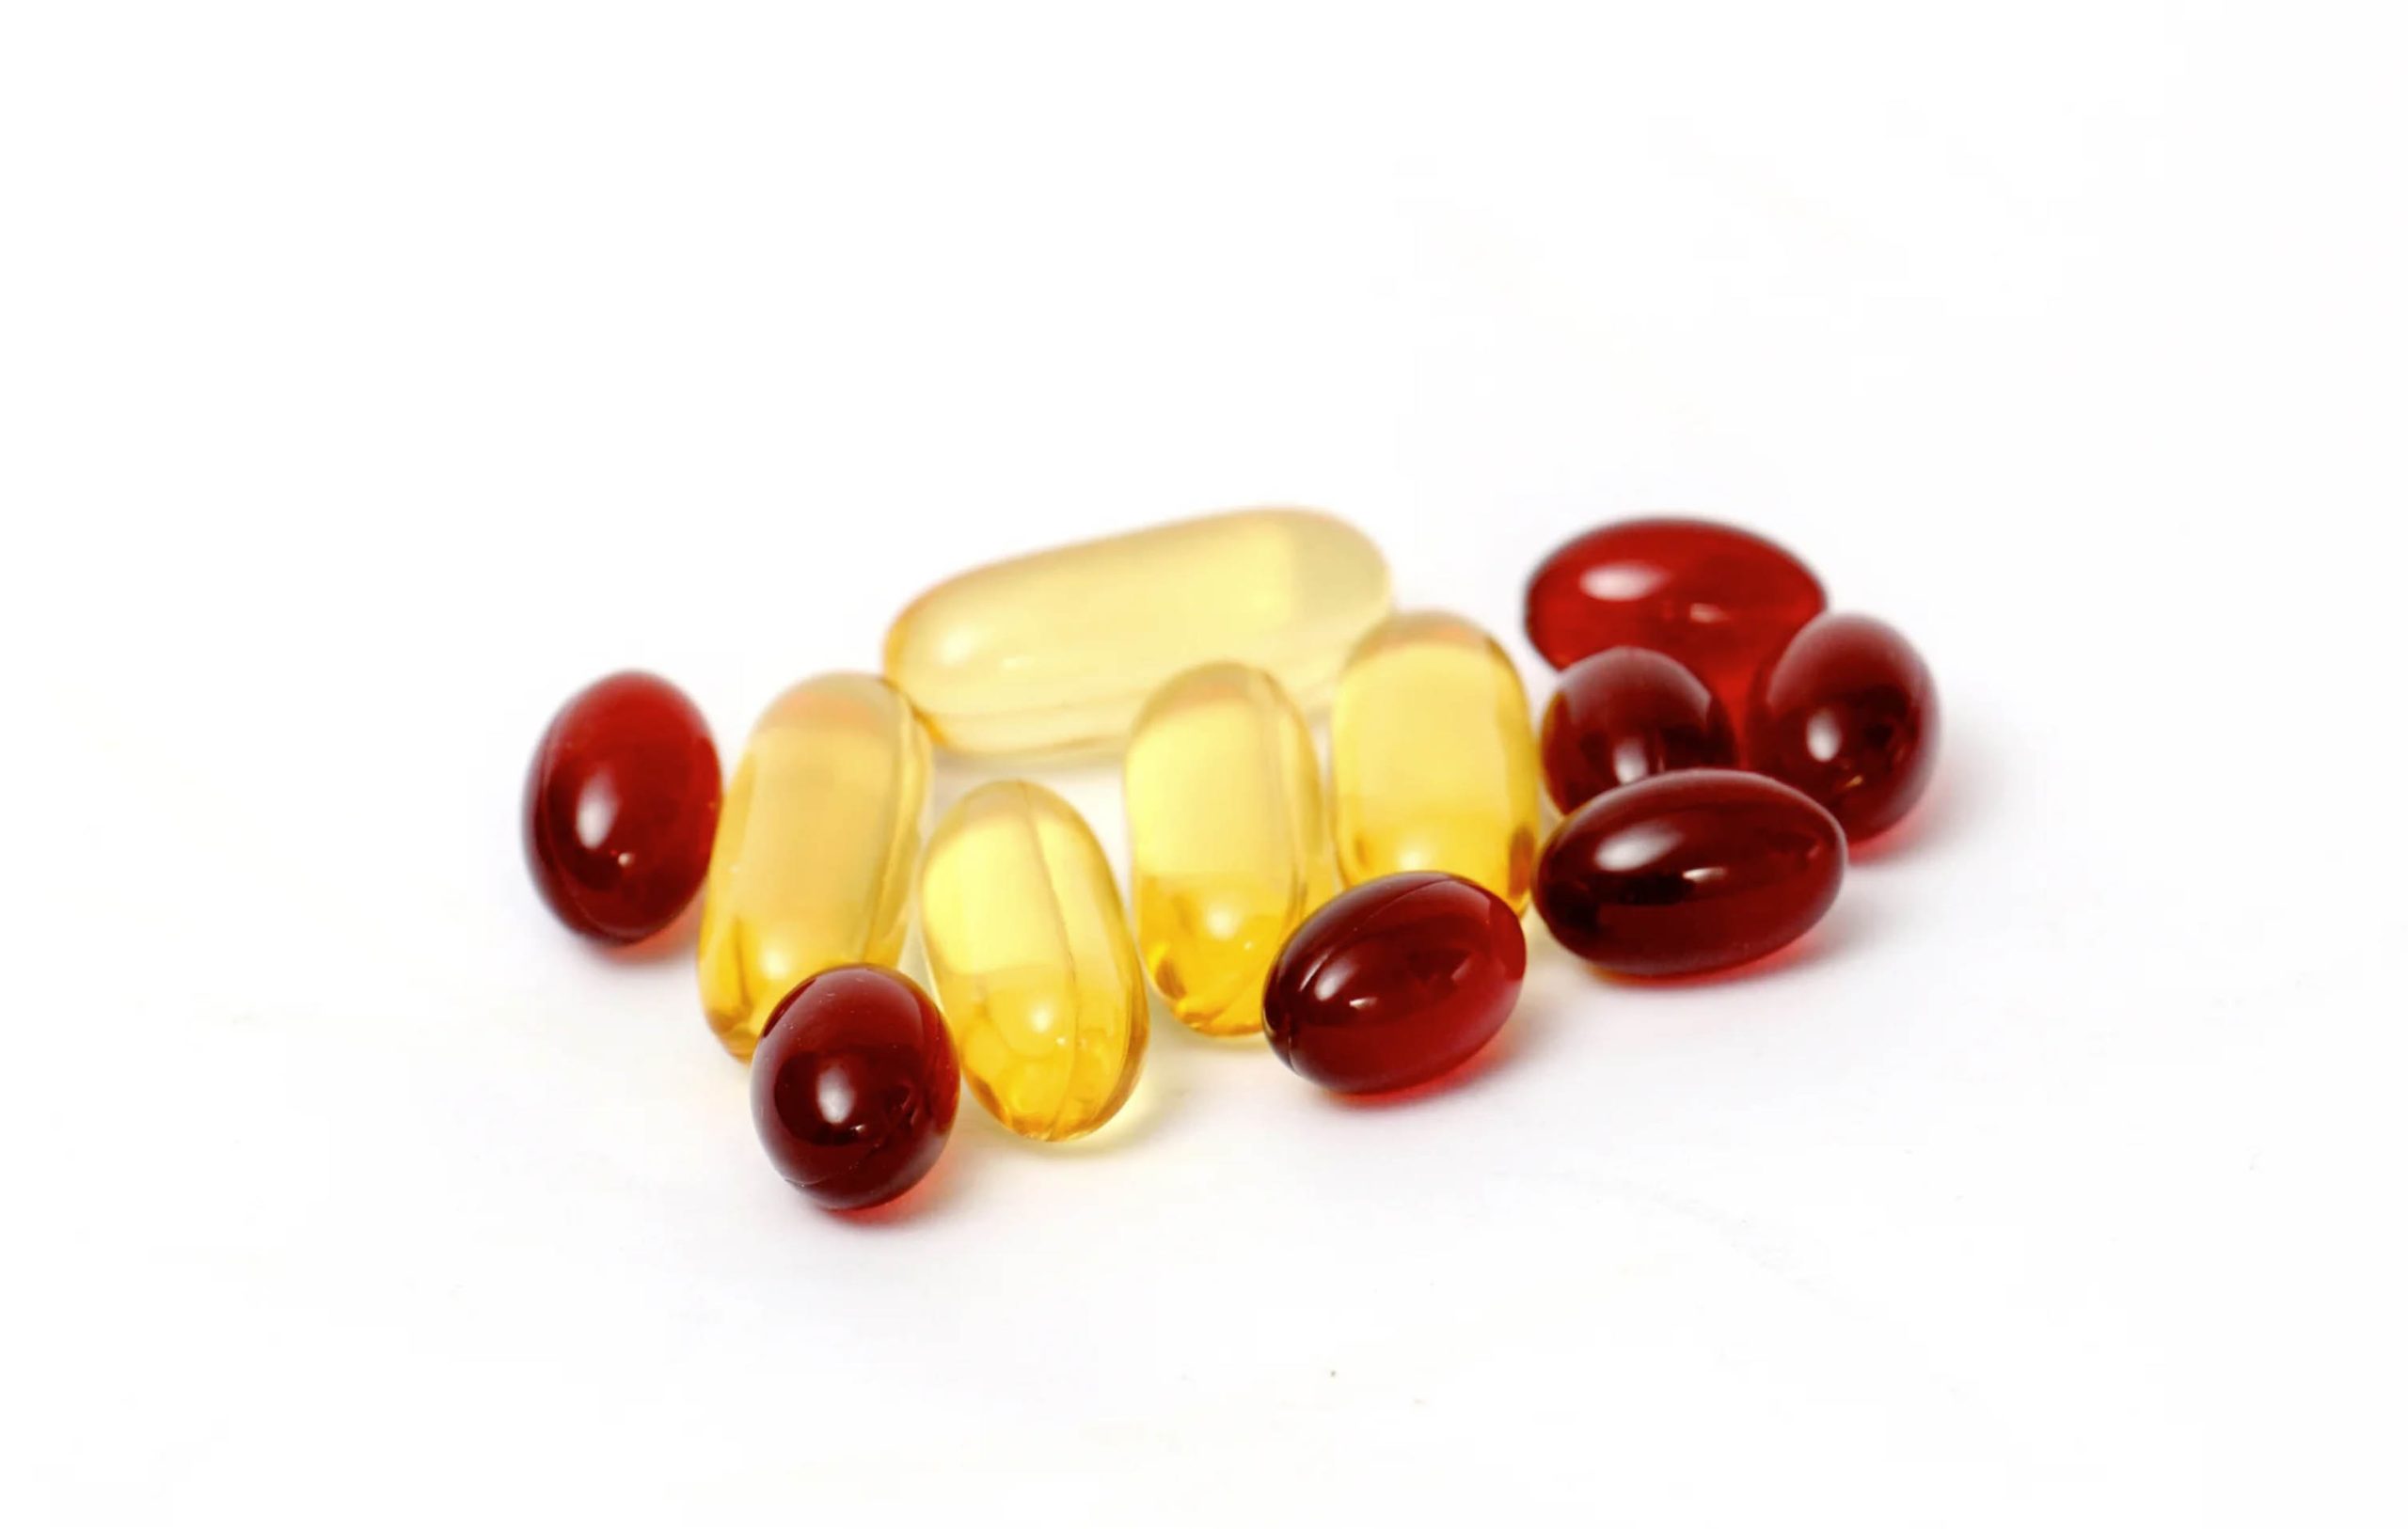 ACGrace - A group of fish oil capsules on a white background.